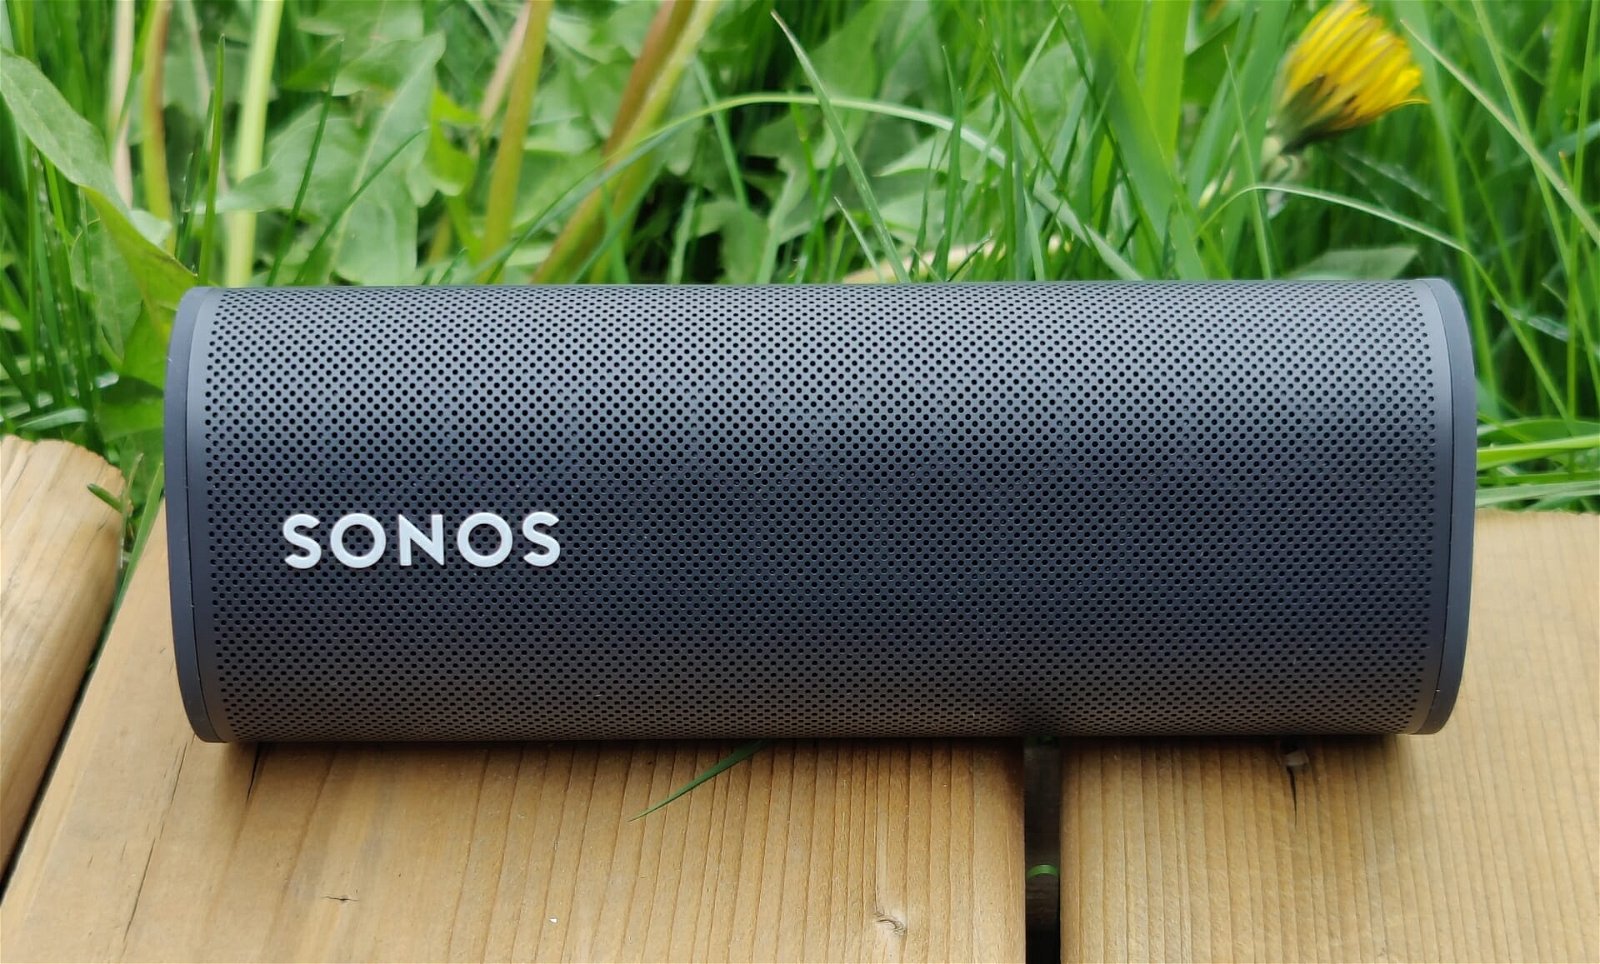 Sonos Is Making Big Waves With Google Conflict And Sonos Voice Assistant